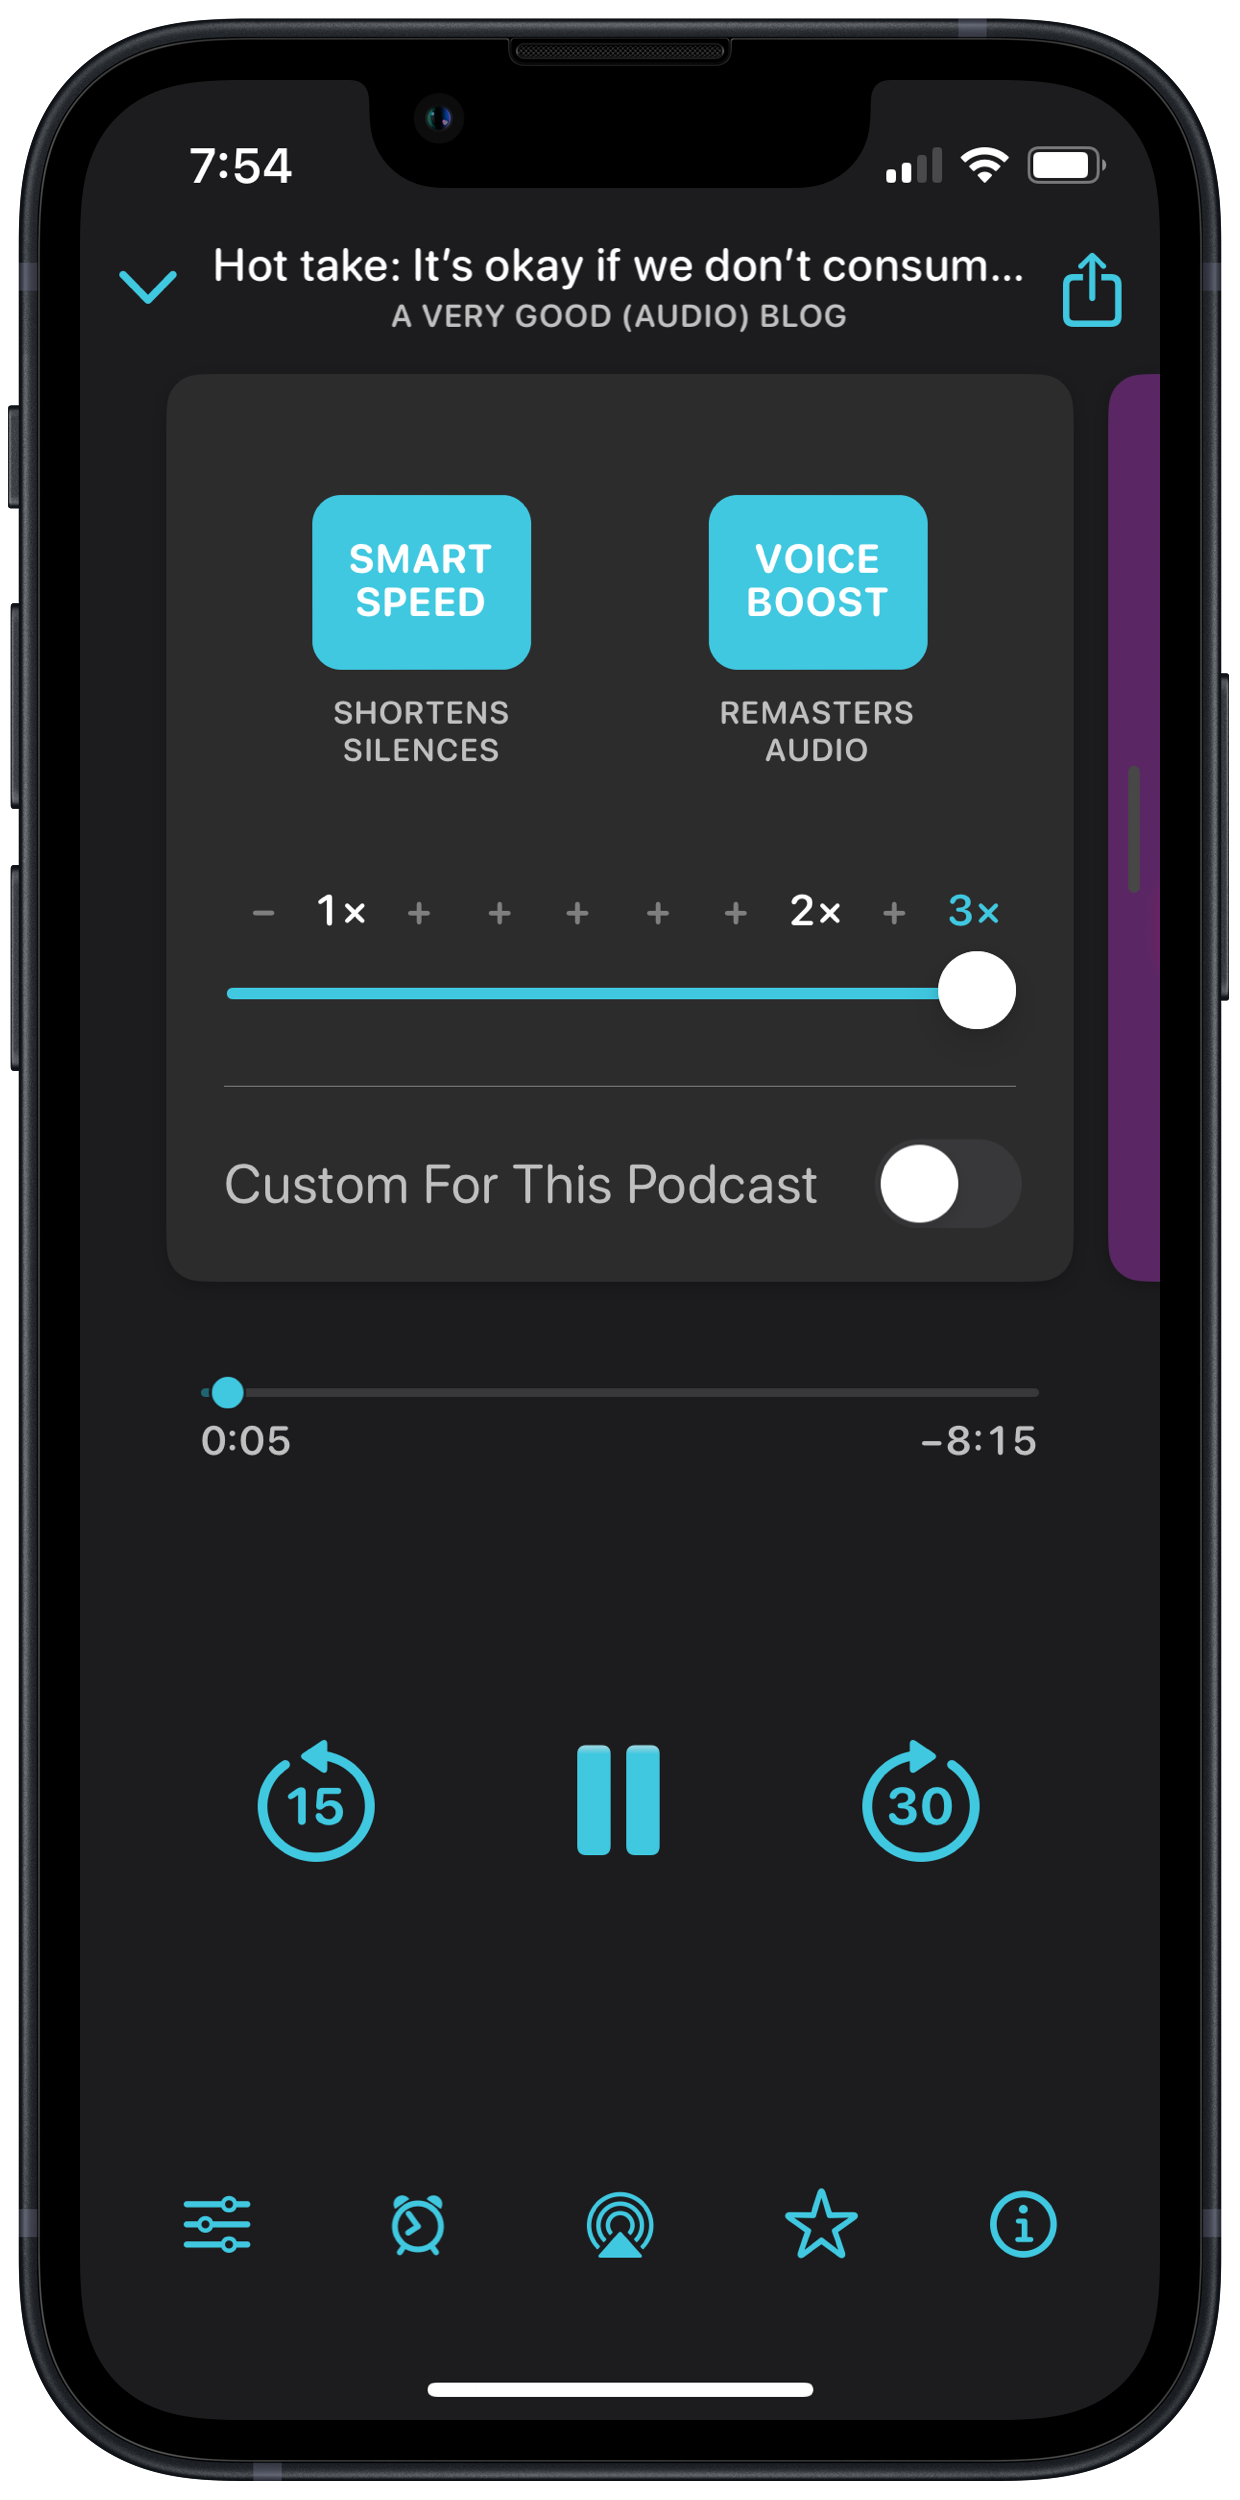 A smartphone screen showing a podcast player app with insanely speedy playback speed and settings like "Smart Speed" and "Voice Boost" enabled. The episode title is "Hot take: It's okay if we don't consum..." from "A VERY GOOD (AUDIO) BLOG."